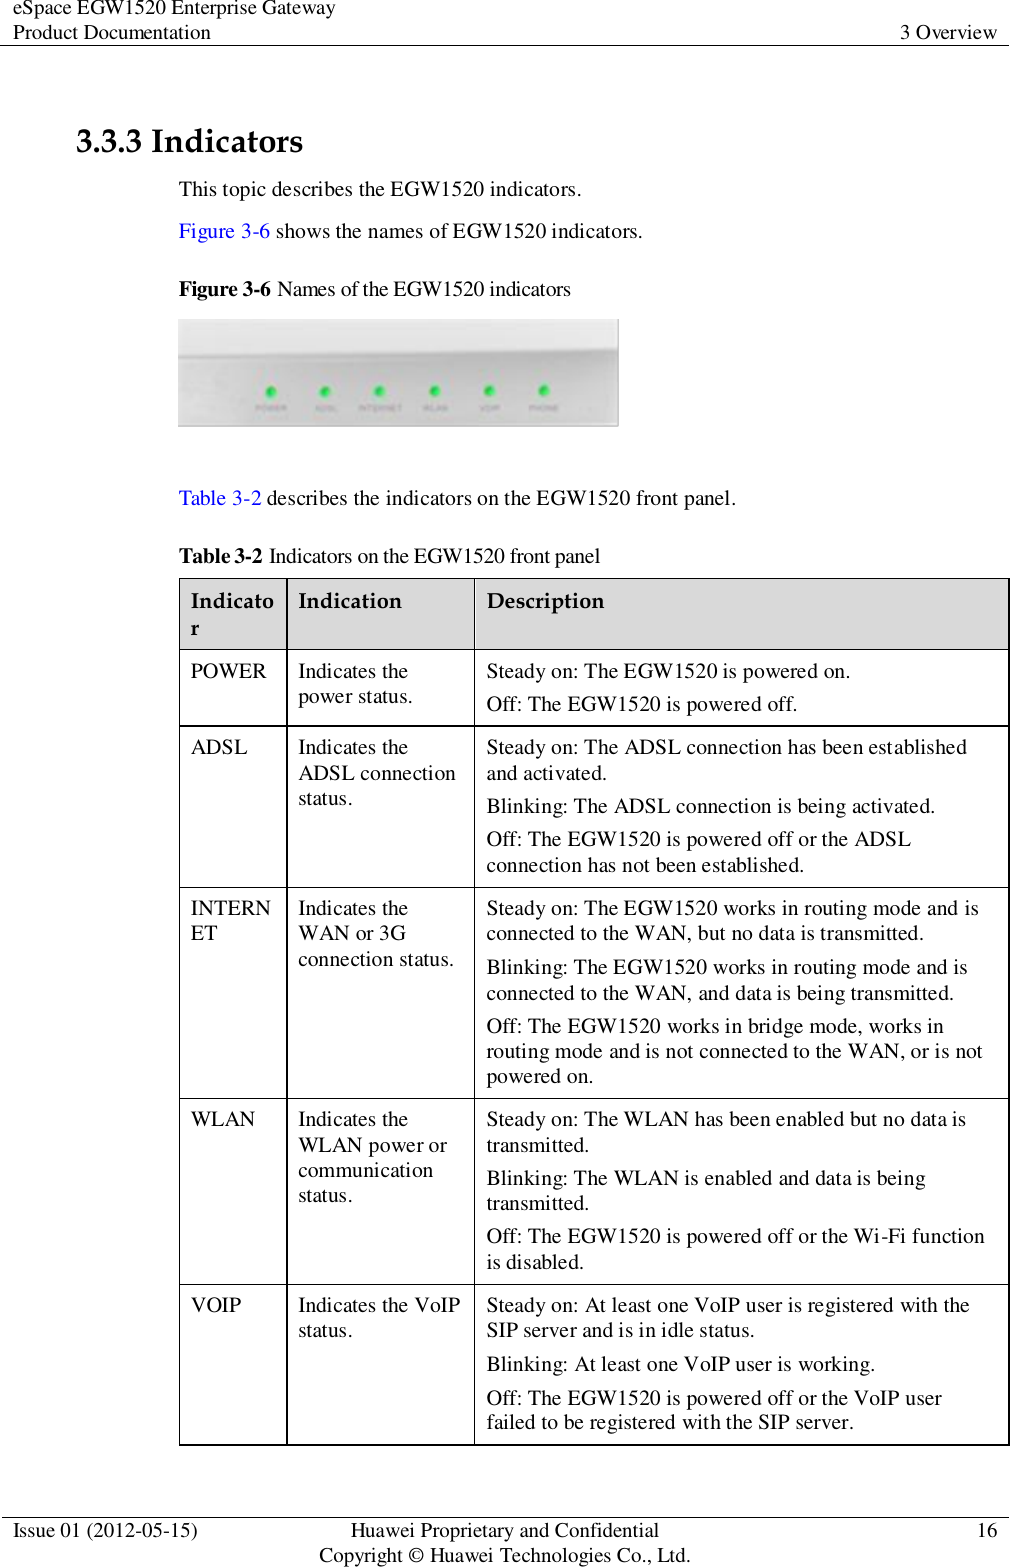 eSpace EGW1520 Enterprise Gateway Product Documentation 3 Overview  Issue 01 (2012-05-15) Huawei Proprietary and Confidential                                     Copyright © Huawei Technologies Co., Ltd. 16   3.3.3 Indicators This topic describes the EGW1520 indicators. Figure 3-6 shows the names of EGW1520 indicators. Figure 3-6 Names of the EGW1520 indicators   Table 3-2 describes the indicators on the EGW1520 front panel. Table 3-2 Indicators on the EGW1520 front panel Indicator Indication Description POWER Indicates the power status. Steady on: The EGW1520 is powered on. Off: The EGW1520 is powered off. ADSL Indicates the ADSL connection status. Steady on: The ADSL connection has been established and activated. Blinking: The ADSL connection is being activated. Off: The EGW1520 is powered off or the ADSL connection has not been established. INTERNET Indicates the WAN or 3G connection status. Steady on: The EGW1520 works in routing mode and is connected to the WAN, but no data is transmitted. Blinking: The EGW1520 works in routing mode and is connected to the WAN, and data is being transmitted. Off: The EGW1520 works in bridge mode, works in routing mode and is not connected to the WAN, or is not powered on. WLAN Indicates the WLAN power or communication status. Steady on: The WLAN has been enabled but no data is transmitted. Blinking: The WLAN is enabled and data is being transmitted. Off: The EGW1520 is powered off or the Wi-Fi function is disabled. VOIP Indicates the VoIP status. Steady on: At least one VoIP user is registered with the SIP server and is in idle status. Blinking: At least one VoIP user is working. Off: The EGW1520 is powered off or the VoIP user failed to be registered with the SIP server. 